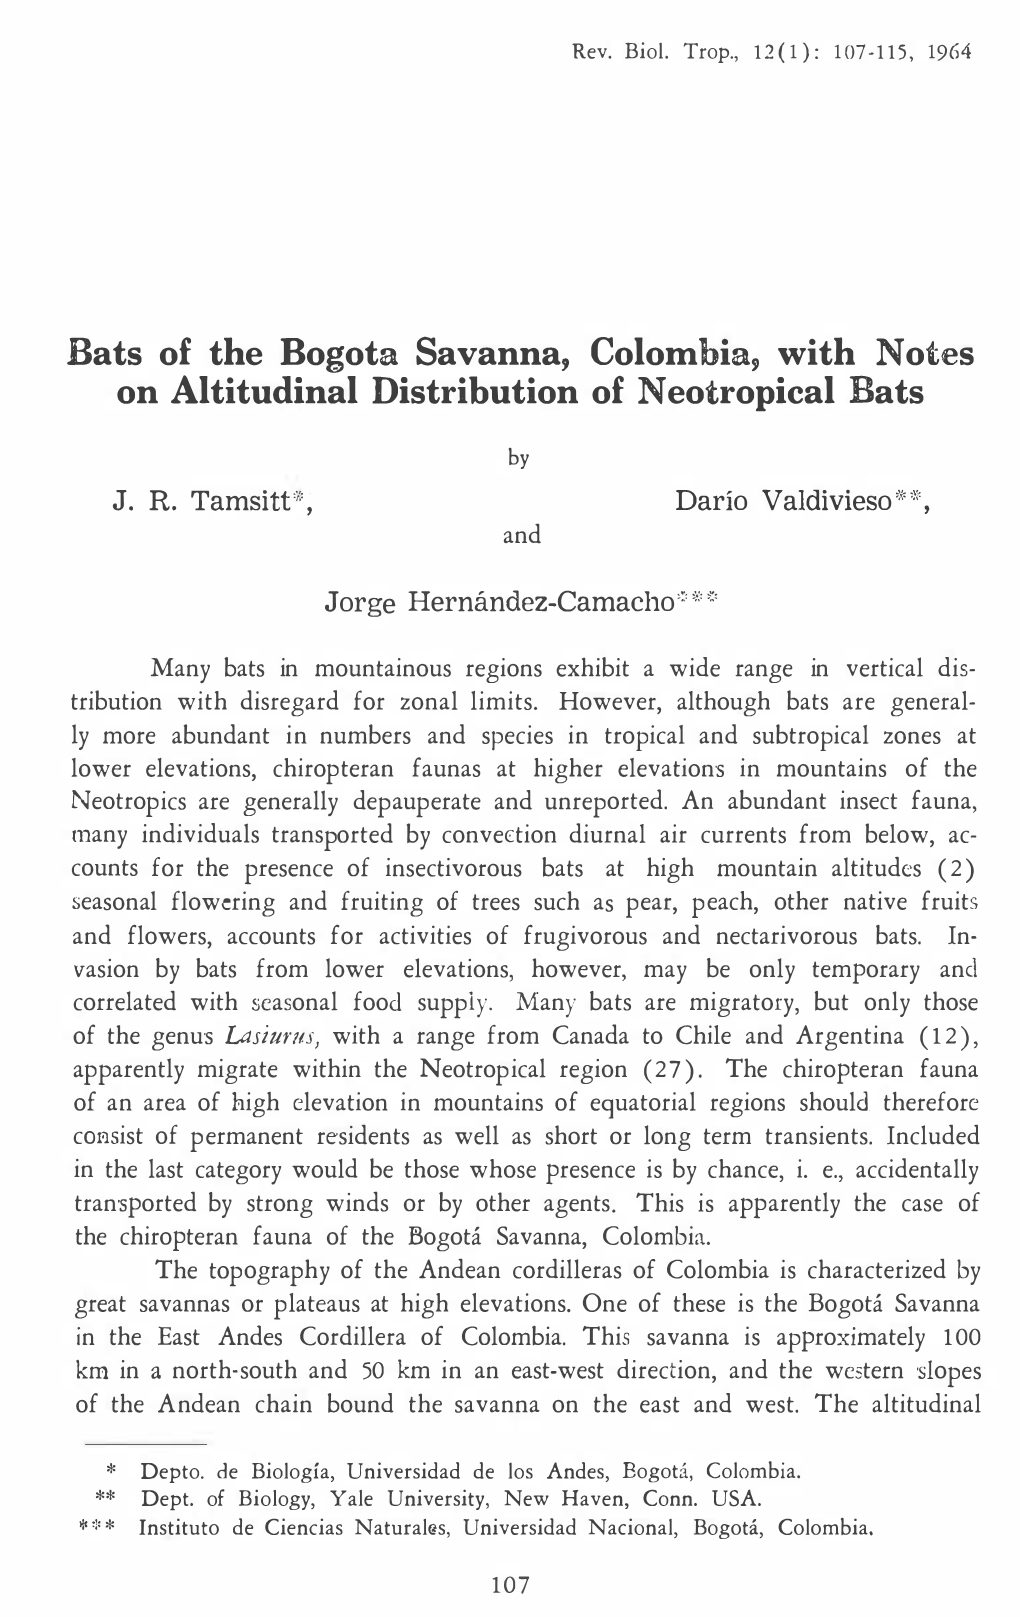 Bats of the Bogota Savanna, Colombia, with Notes on Altitudinal Distribution of N Eotropical Bats